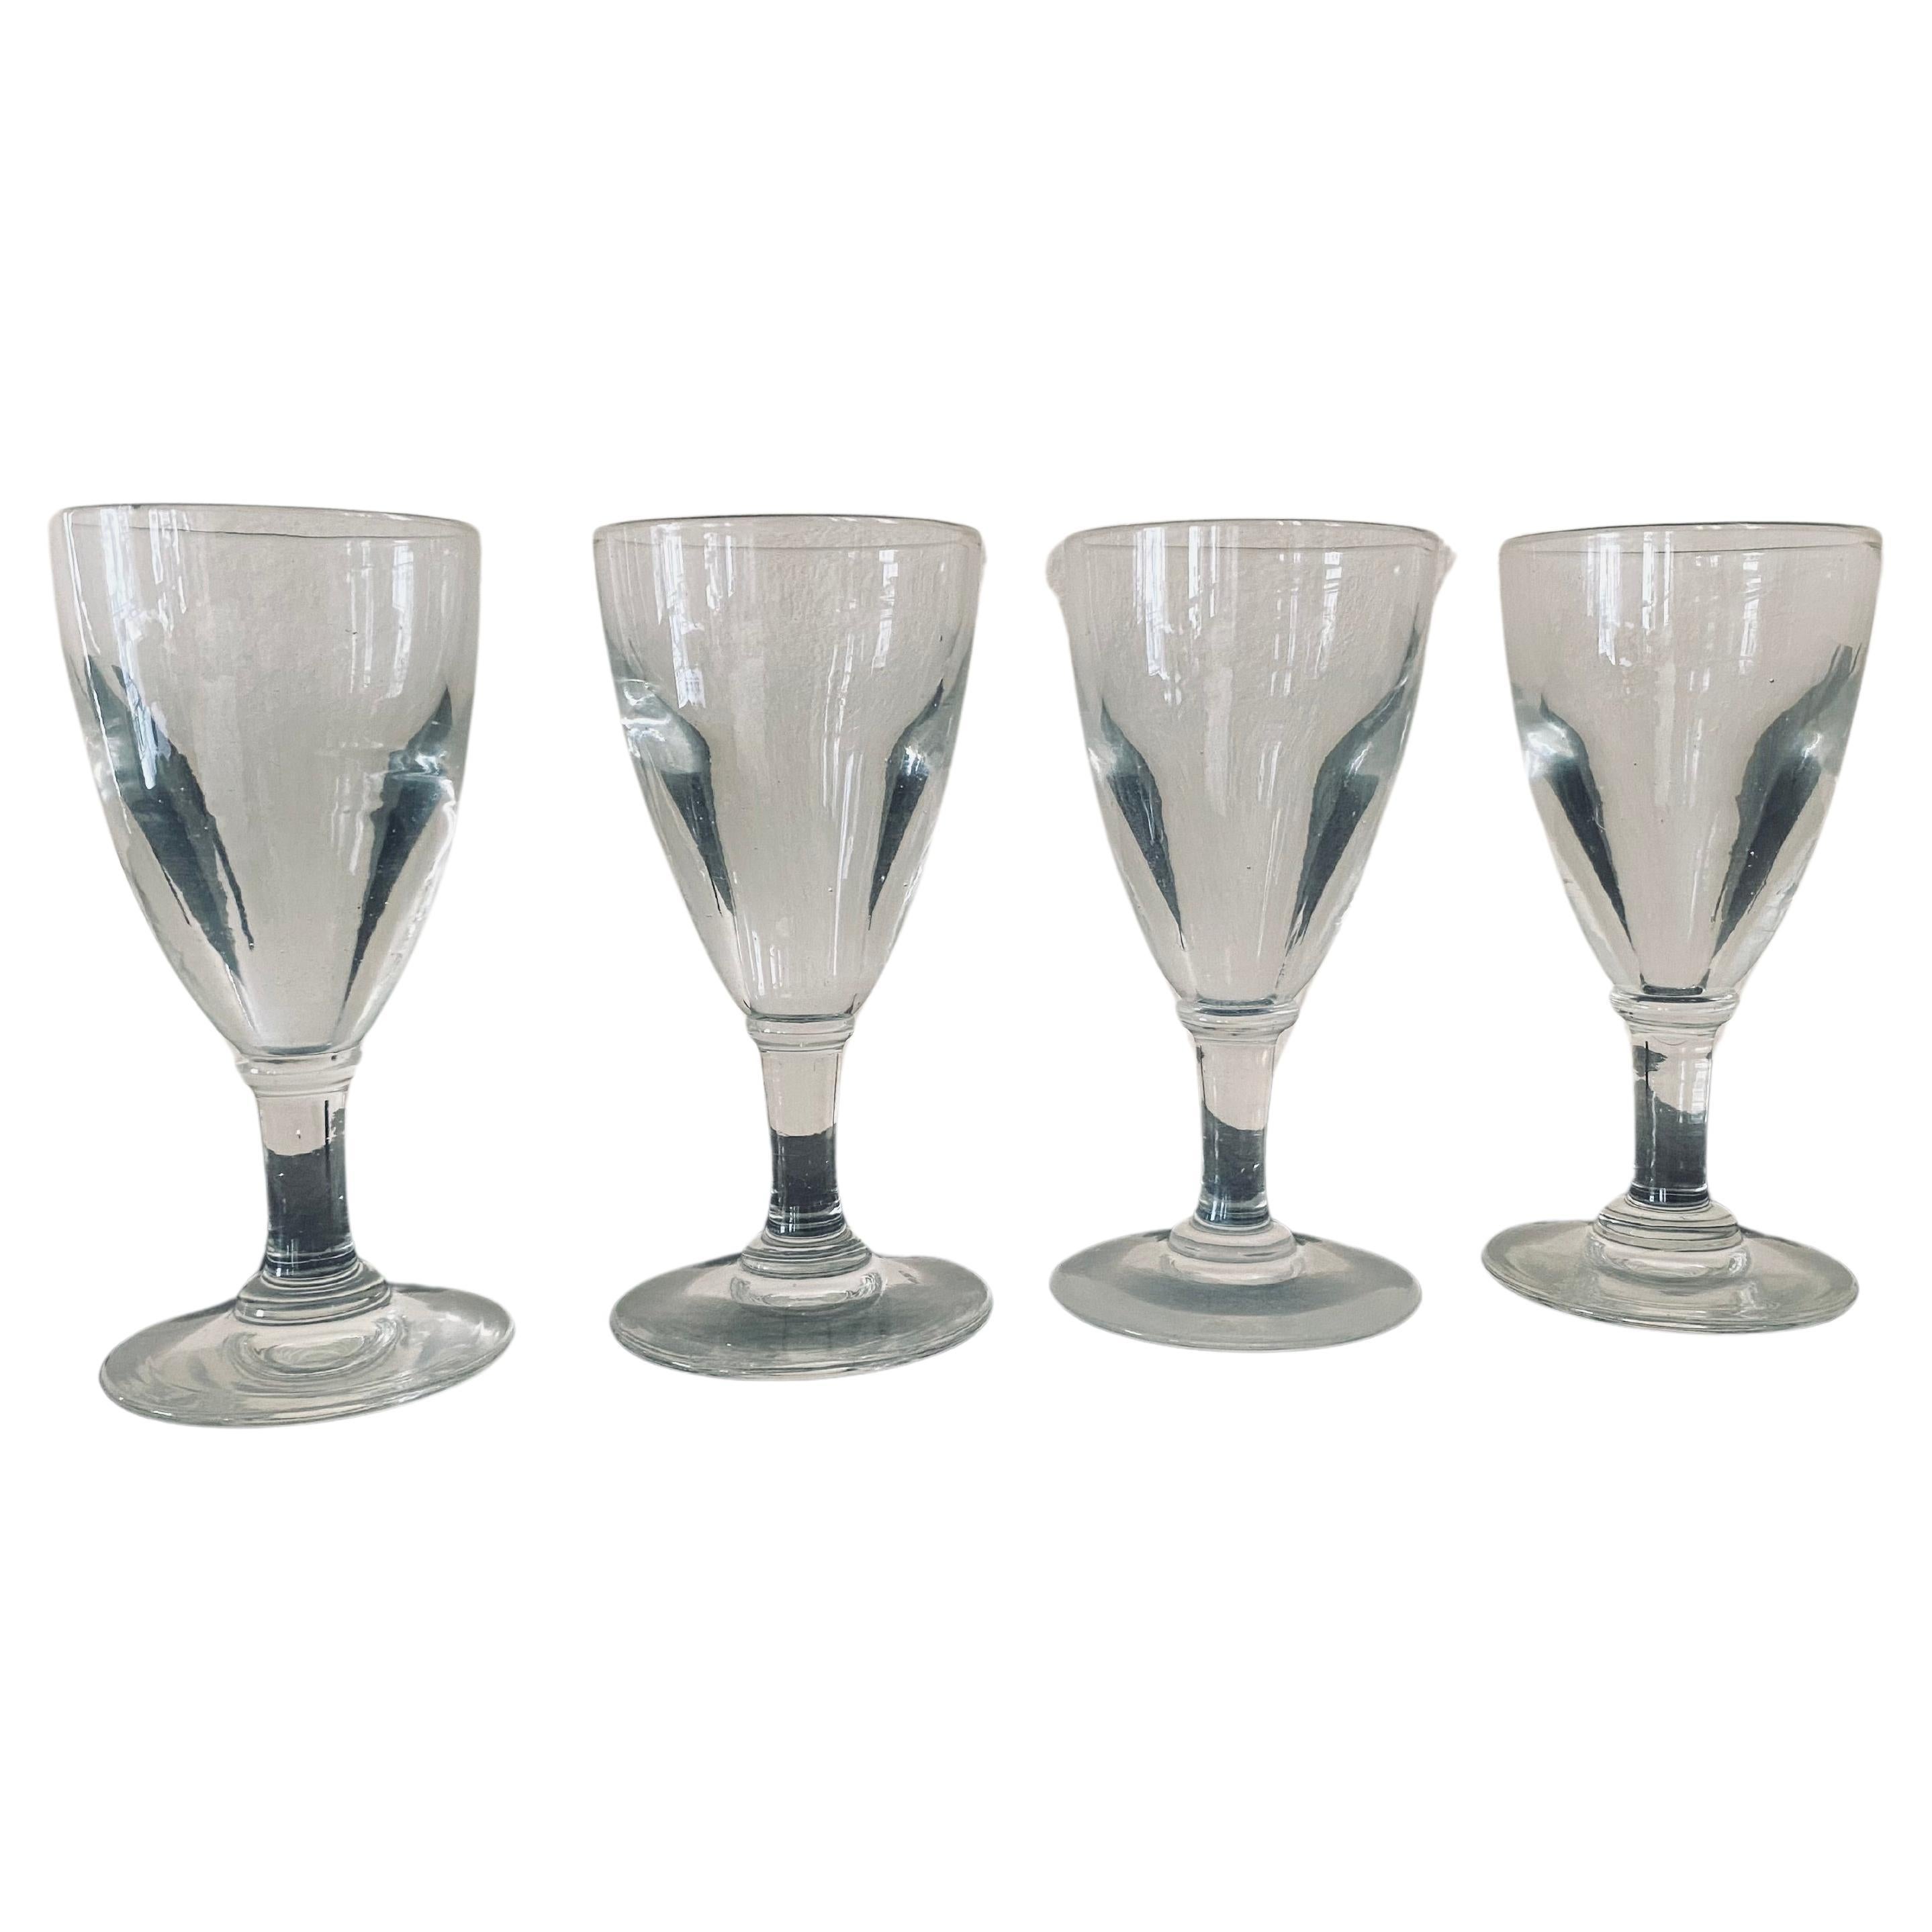 Vintage Pasties Glasses from 1900 France: Timeless Elegance in Antique Glassware